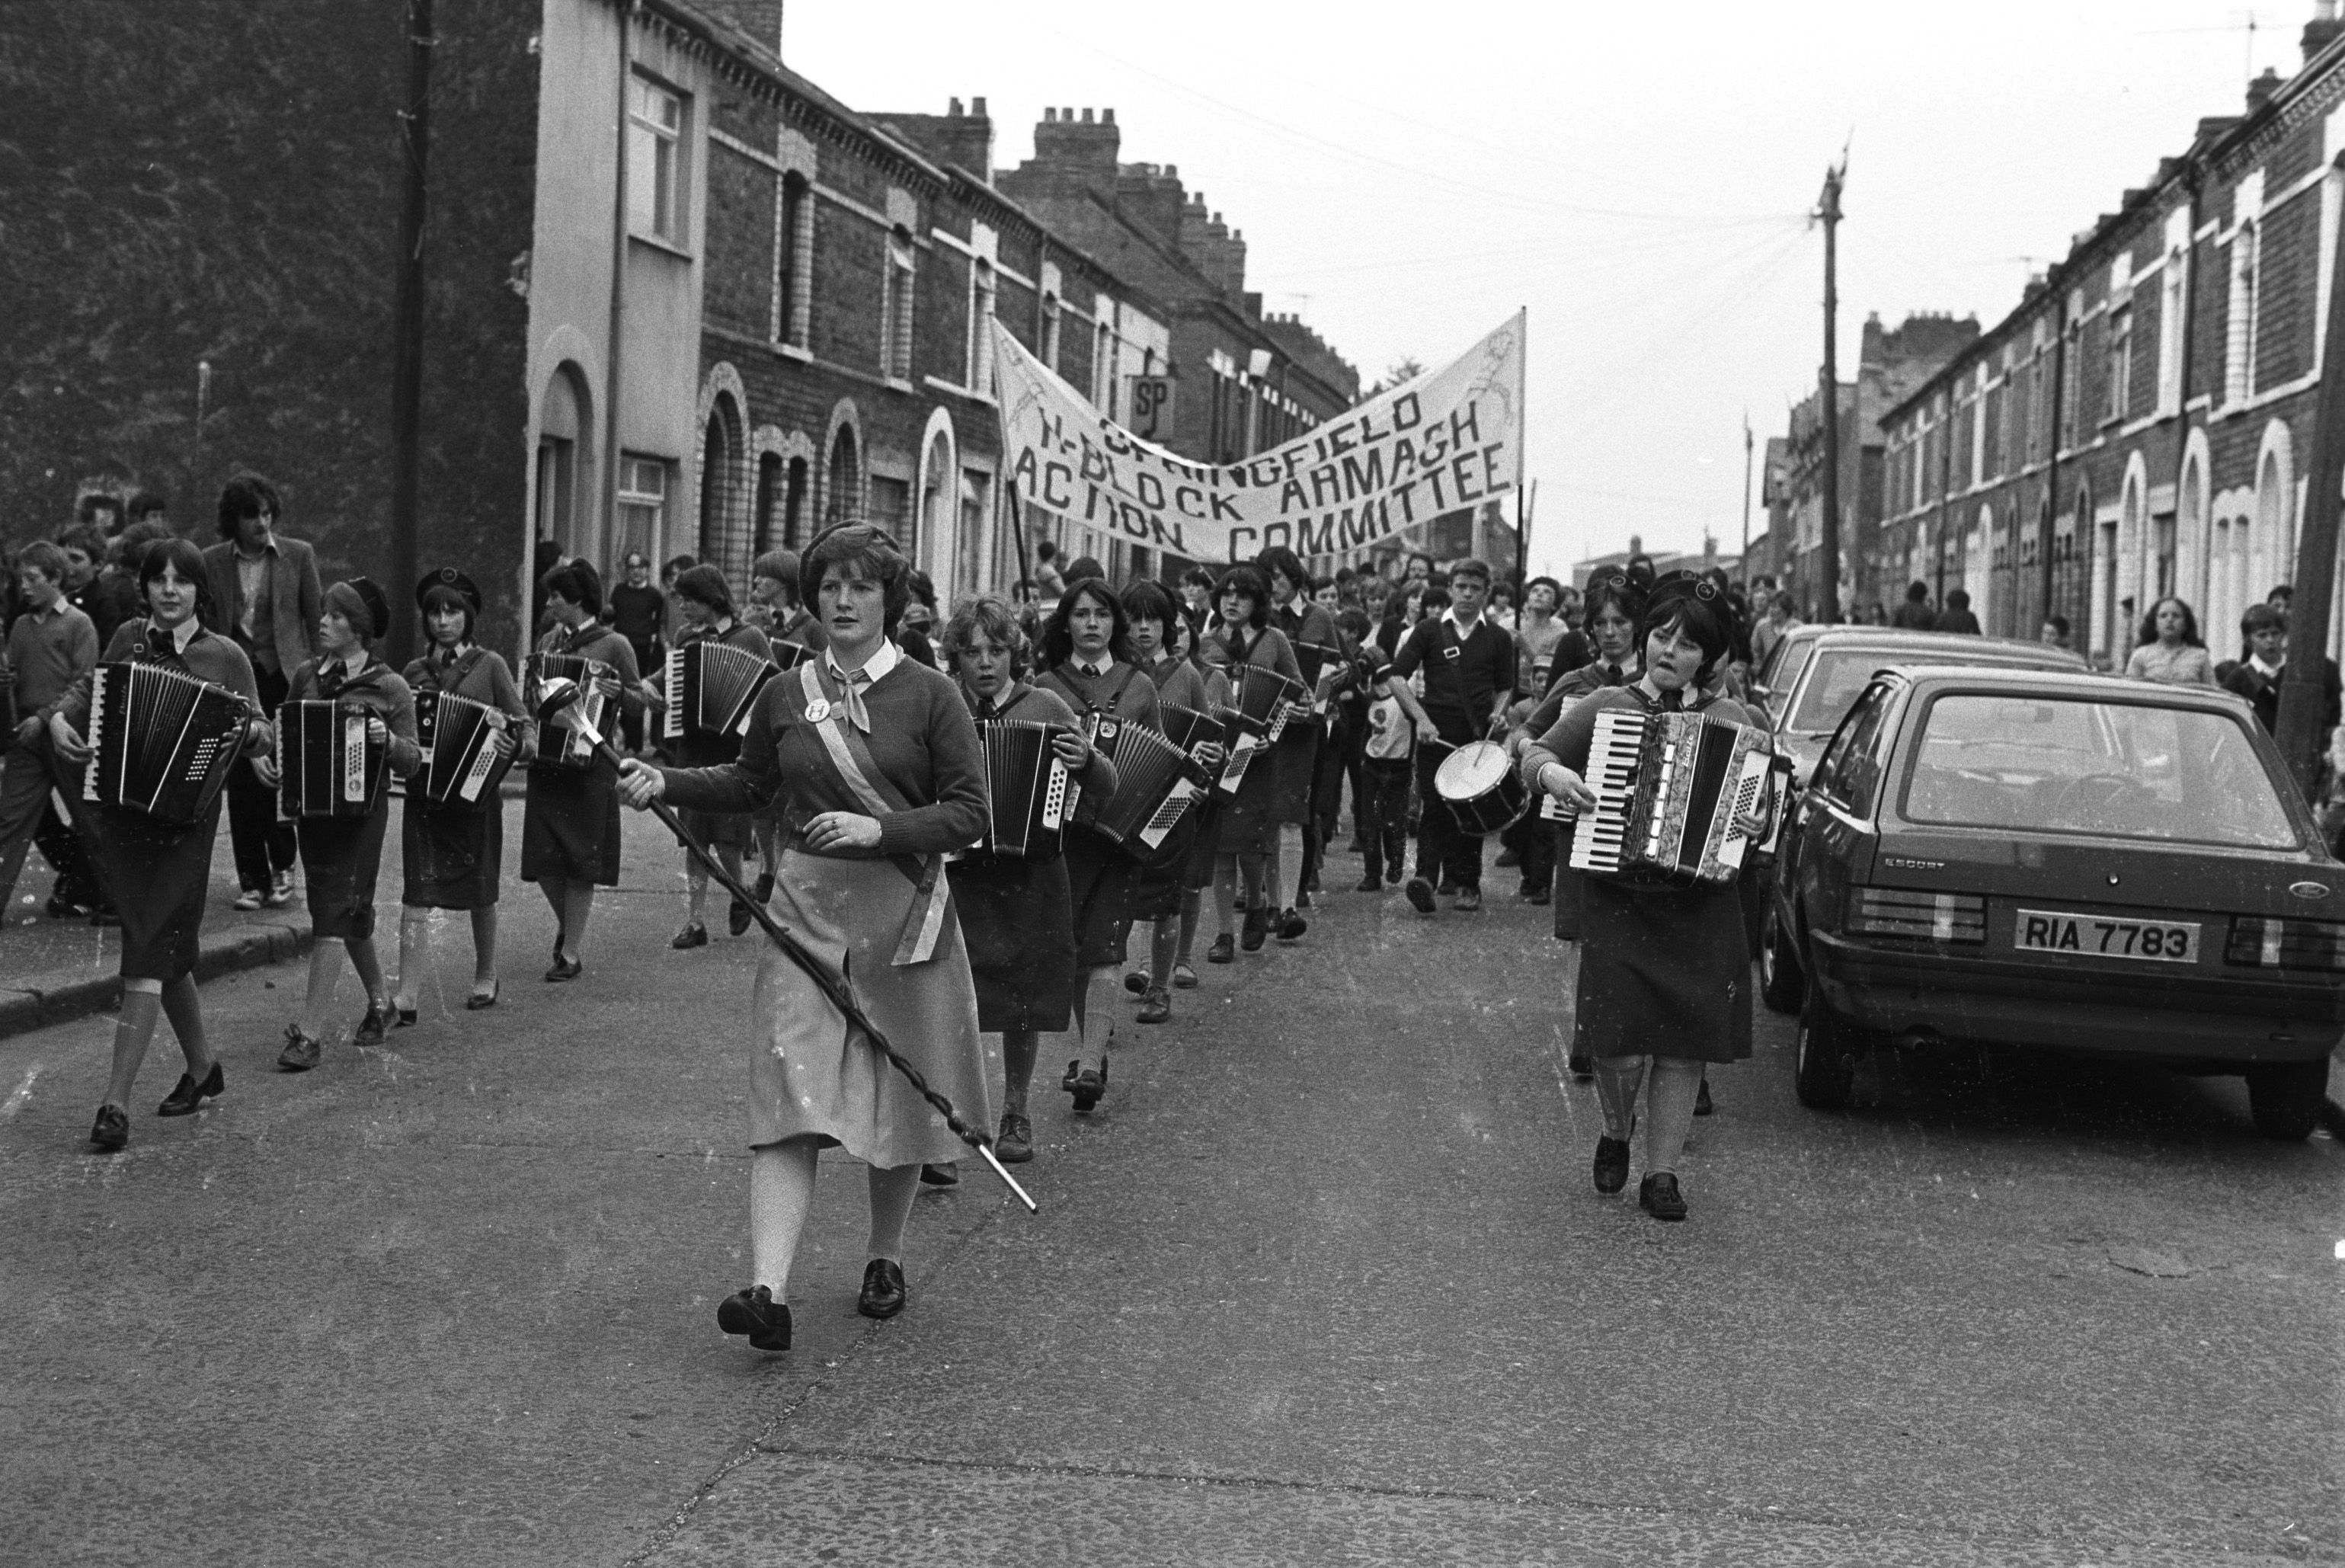 SUPPORT: An anti-H-Block/Armagh parade on the Springfield Road